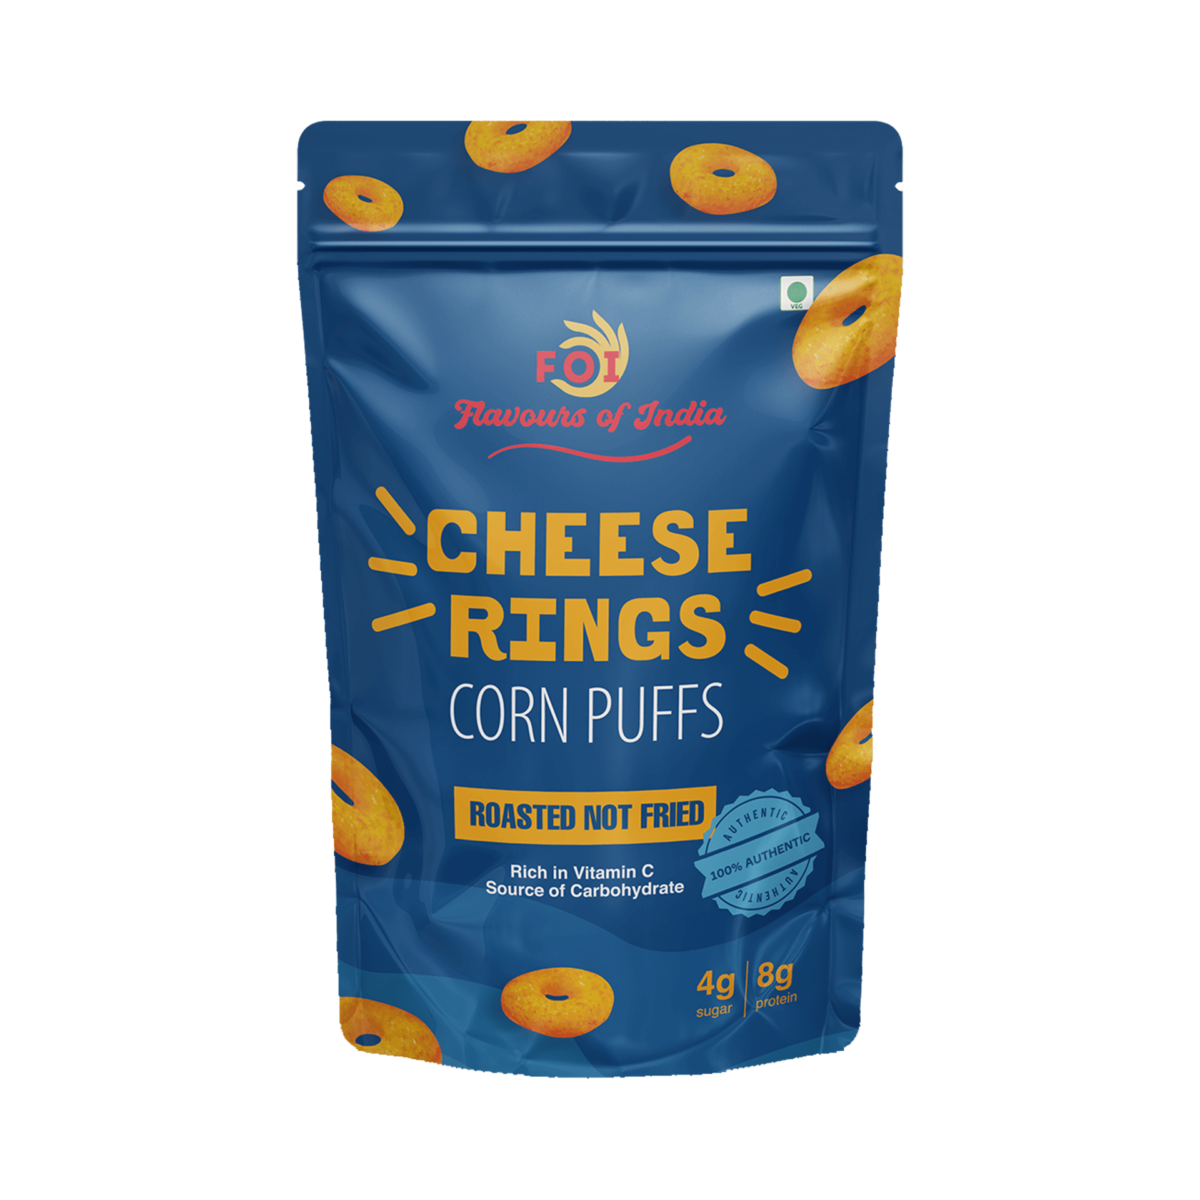 Corn Puffs - Cheese Rings - FOI Flavours Of India